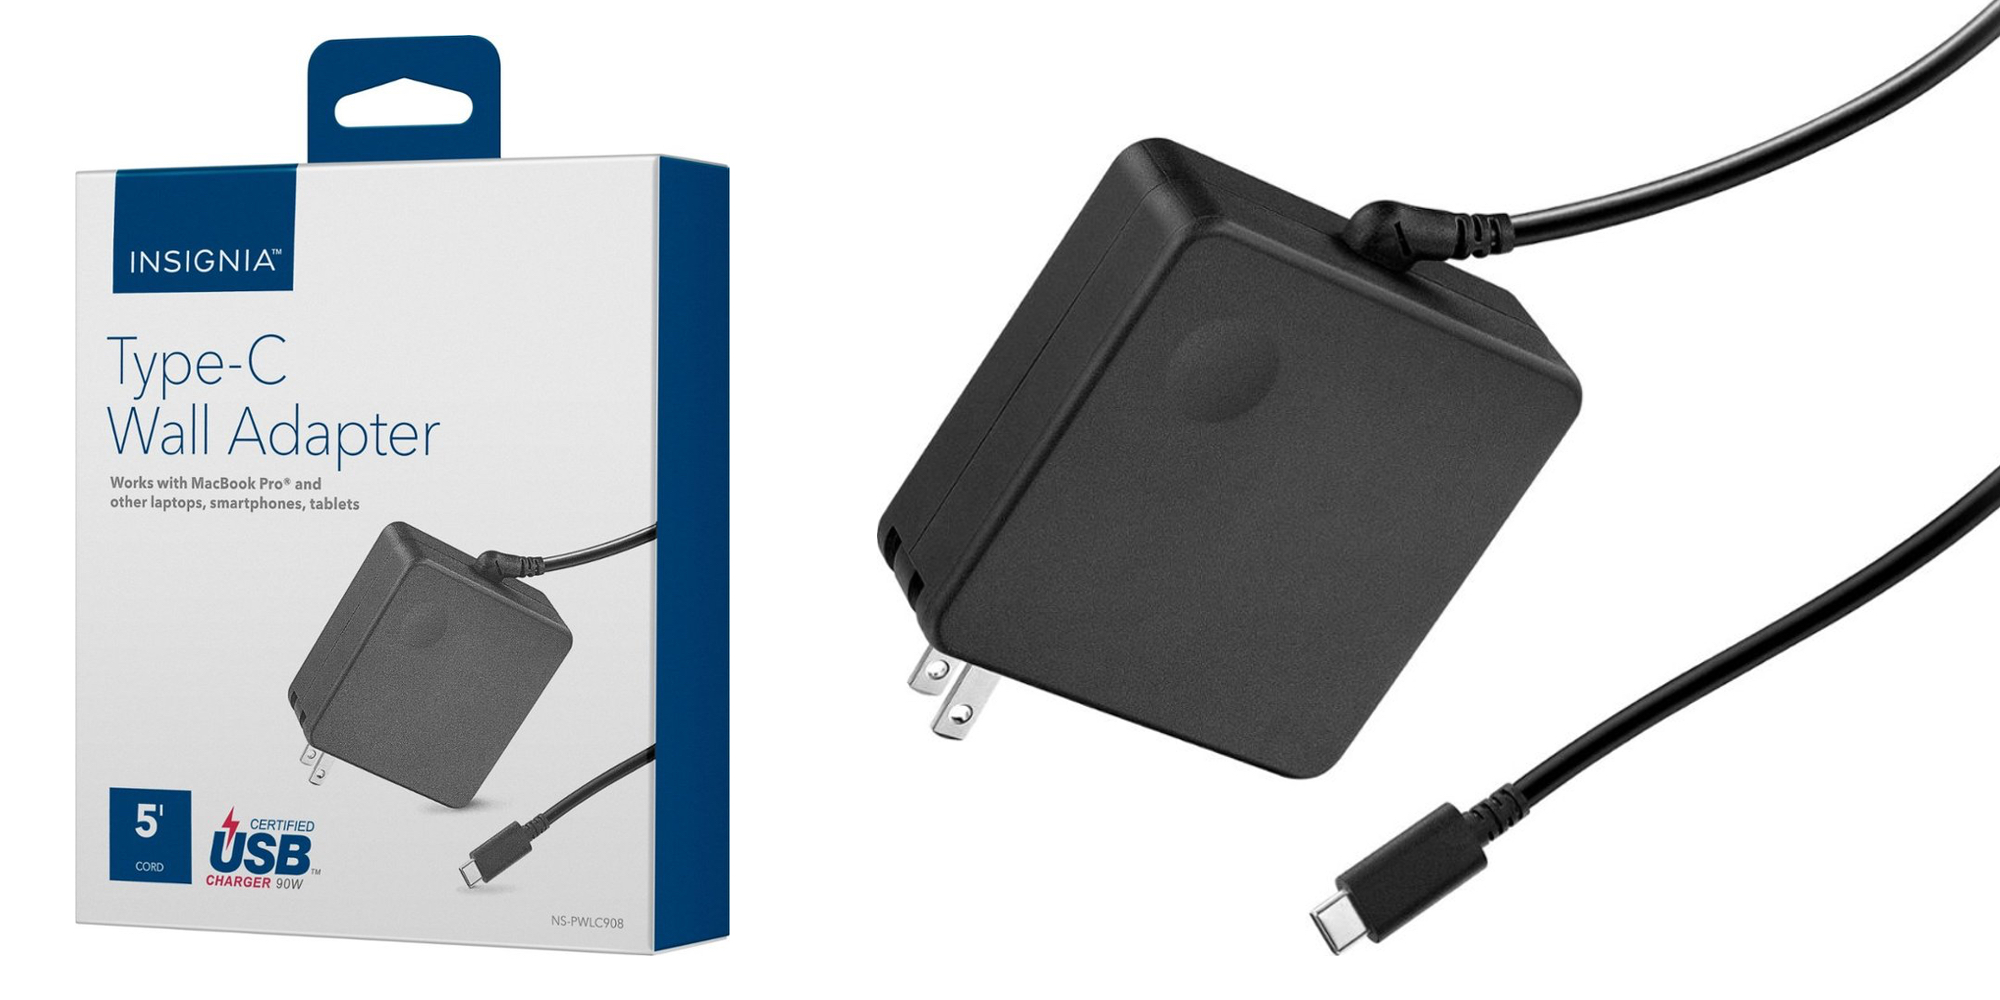 Smartphone Accessories: Insignia 90W USB-C PD Wall Charger $40 shipped, more